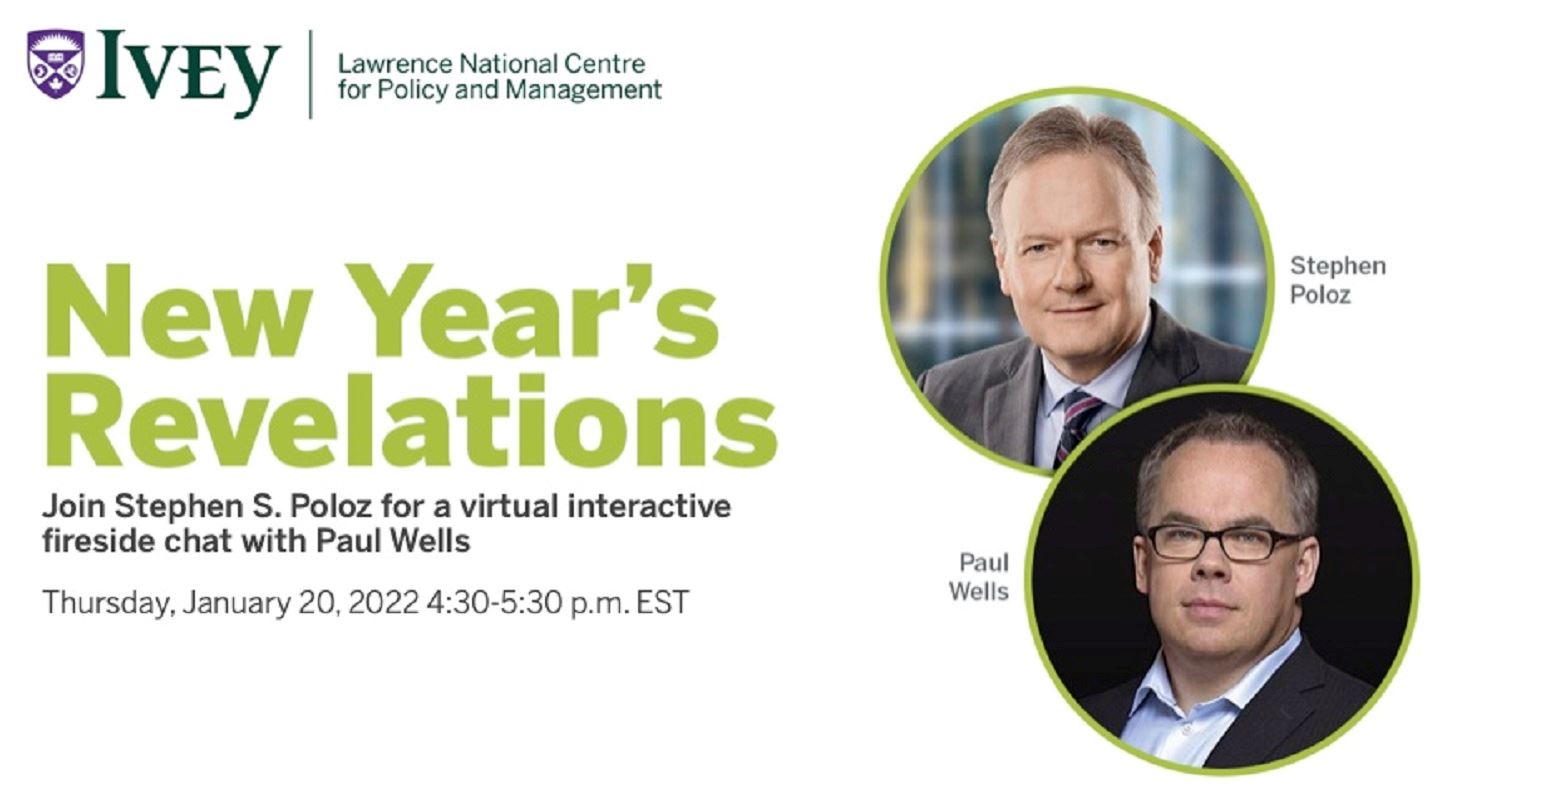 New Year's Revelations: A Fireside Chat with Stephen Poloz and Paul Wells